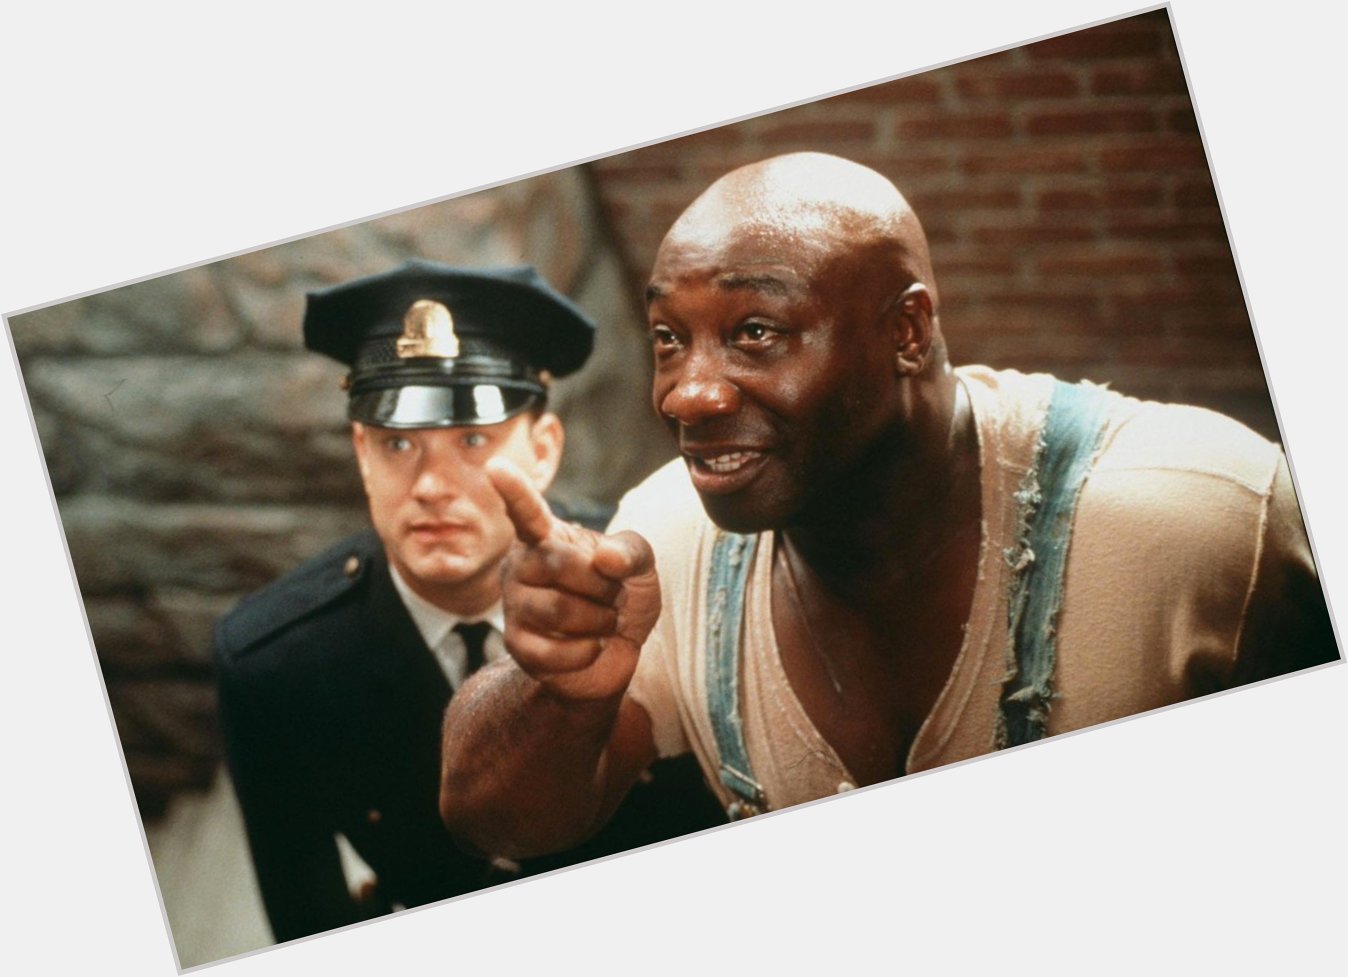 Happy Birthday to Michael Clarke Duncan who would have turned 60 today! 